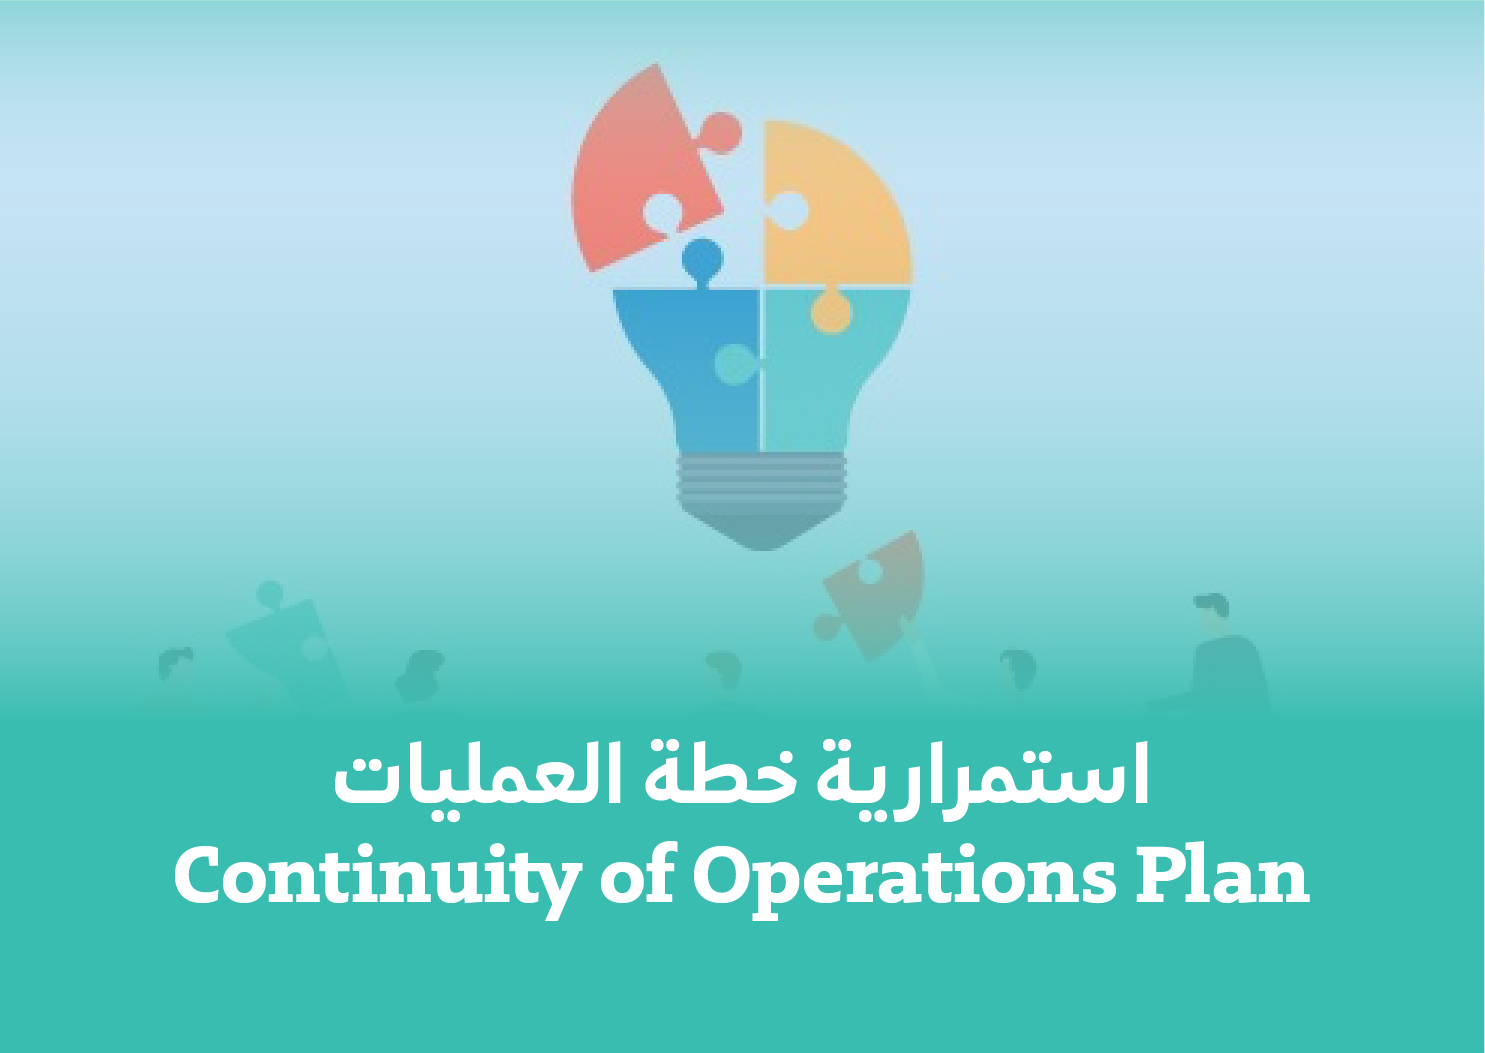 Tabletop - Continuity of Operations Plan